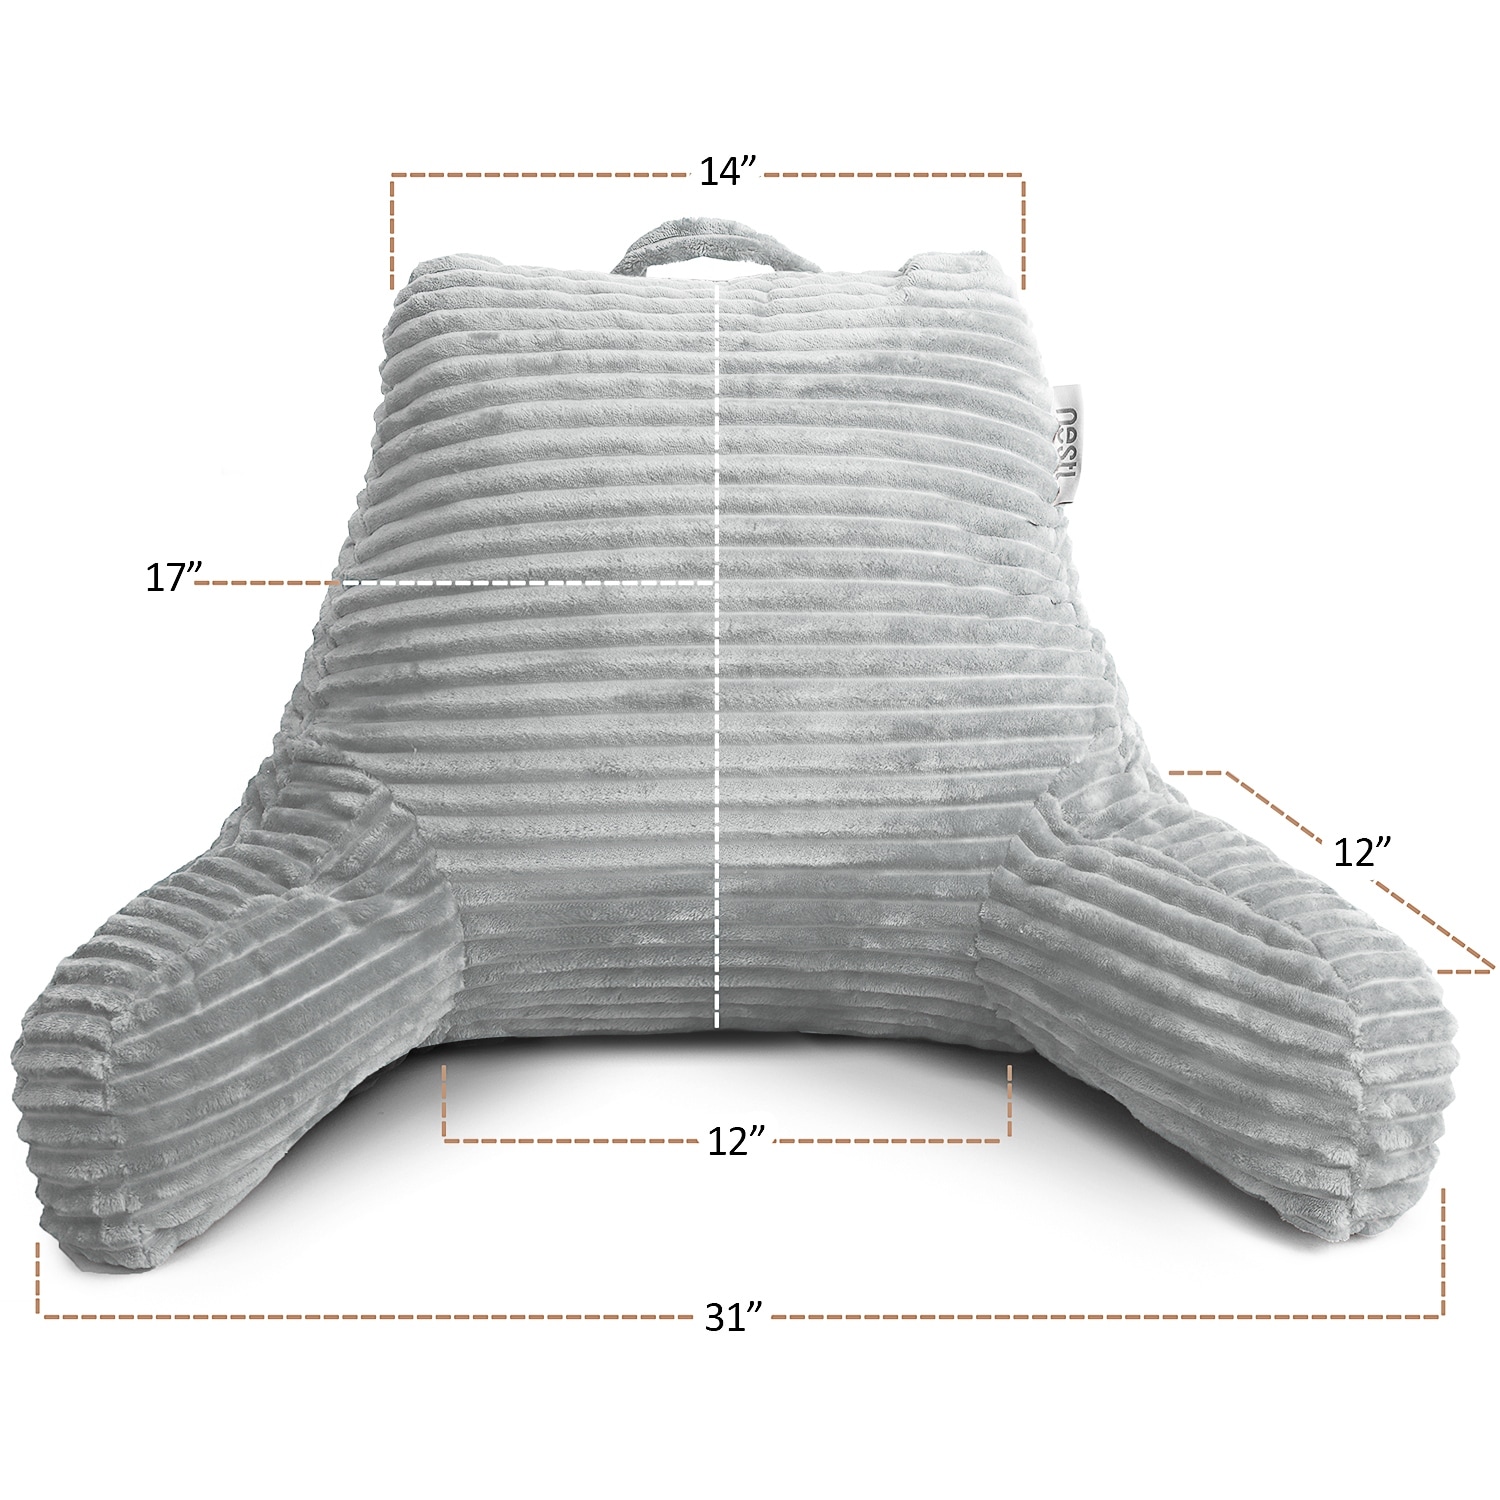 https://ak1.ostkcdn.com/images/products/is/images/direct/2add6399f818bb6284e999dcb9ebfb751079bce7/Nestl-Cut-Plush-Striped-Reading-Pillow---Back-Support-Shredded-Memory-Foam-Bed-Rest-Pillow-with-Arms.jpg